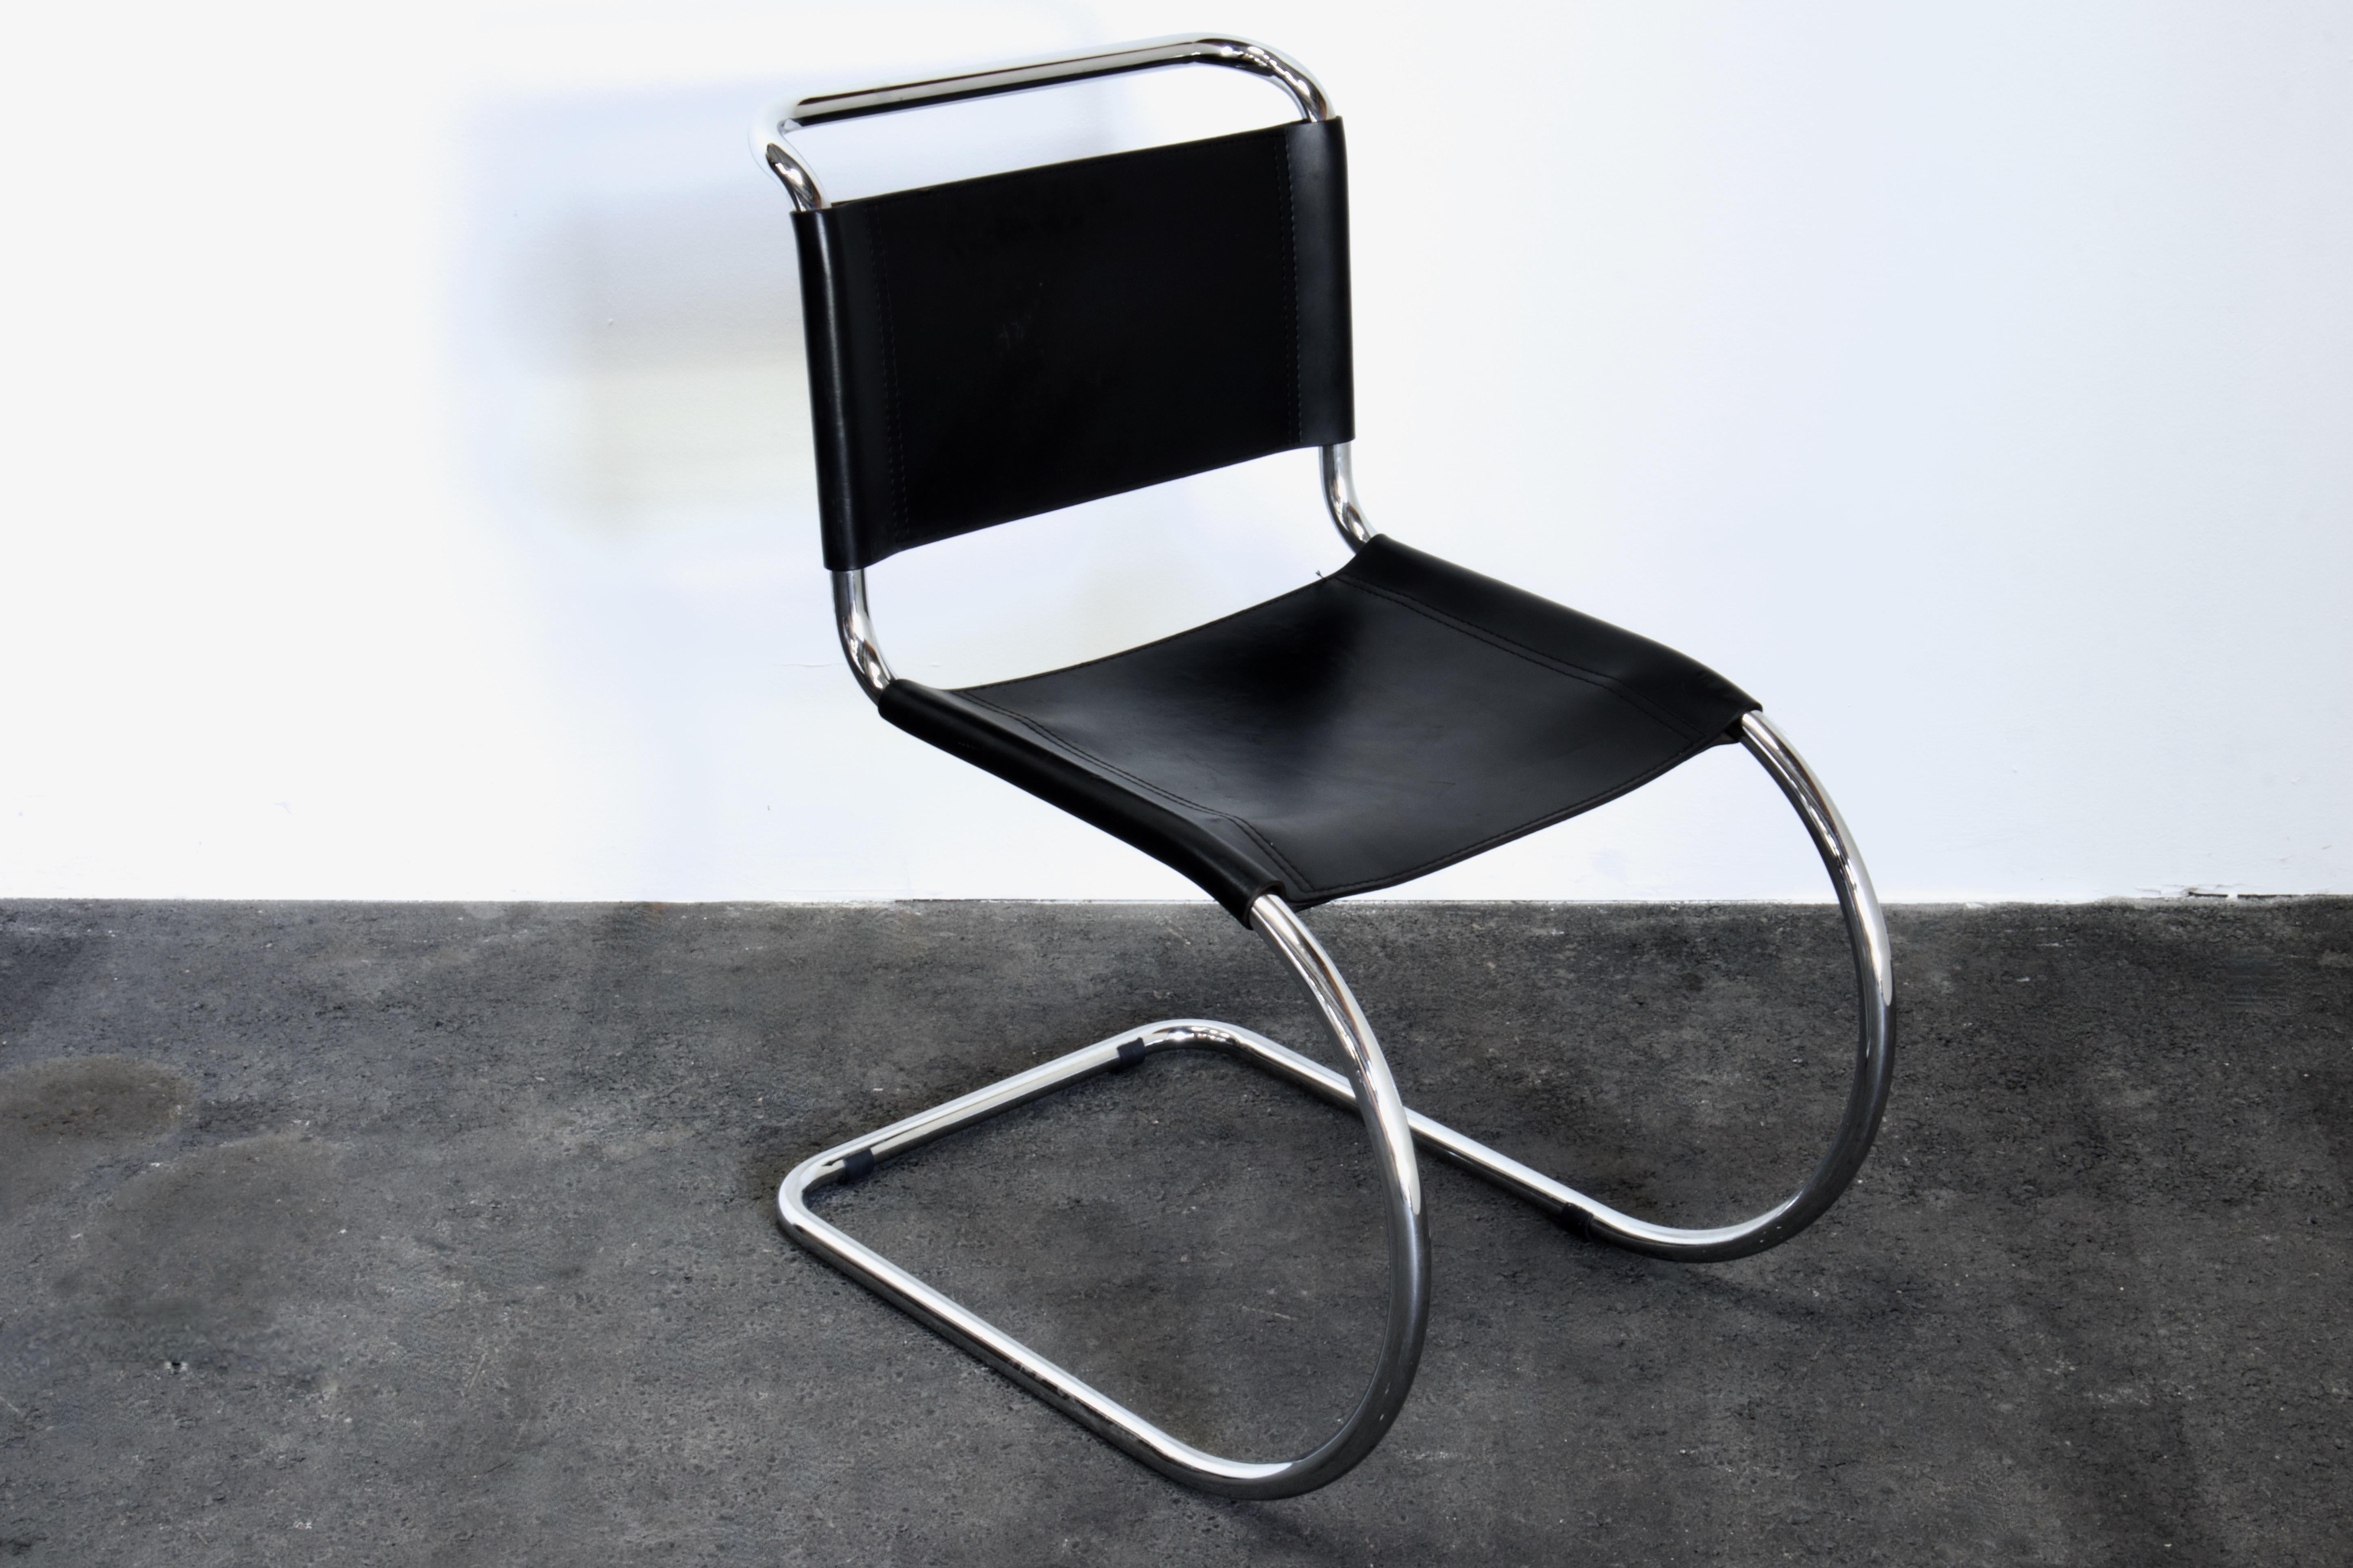 Bauhaus 8 Mies van der Rohe Cantilever Chairs in Chrome & Black Saddle Leather 1980s For Sale